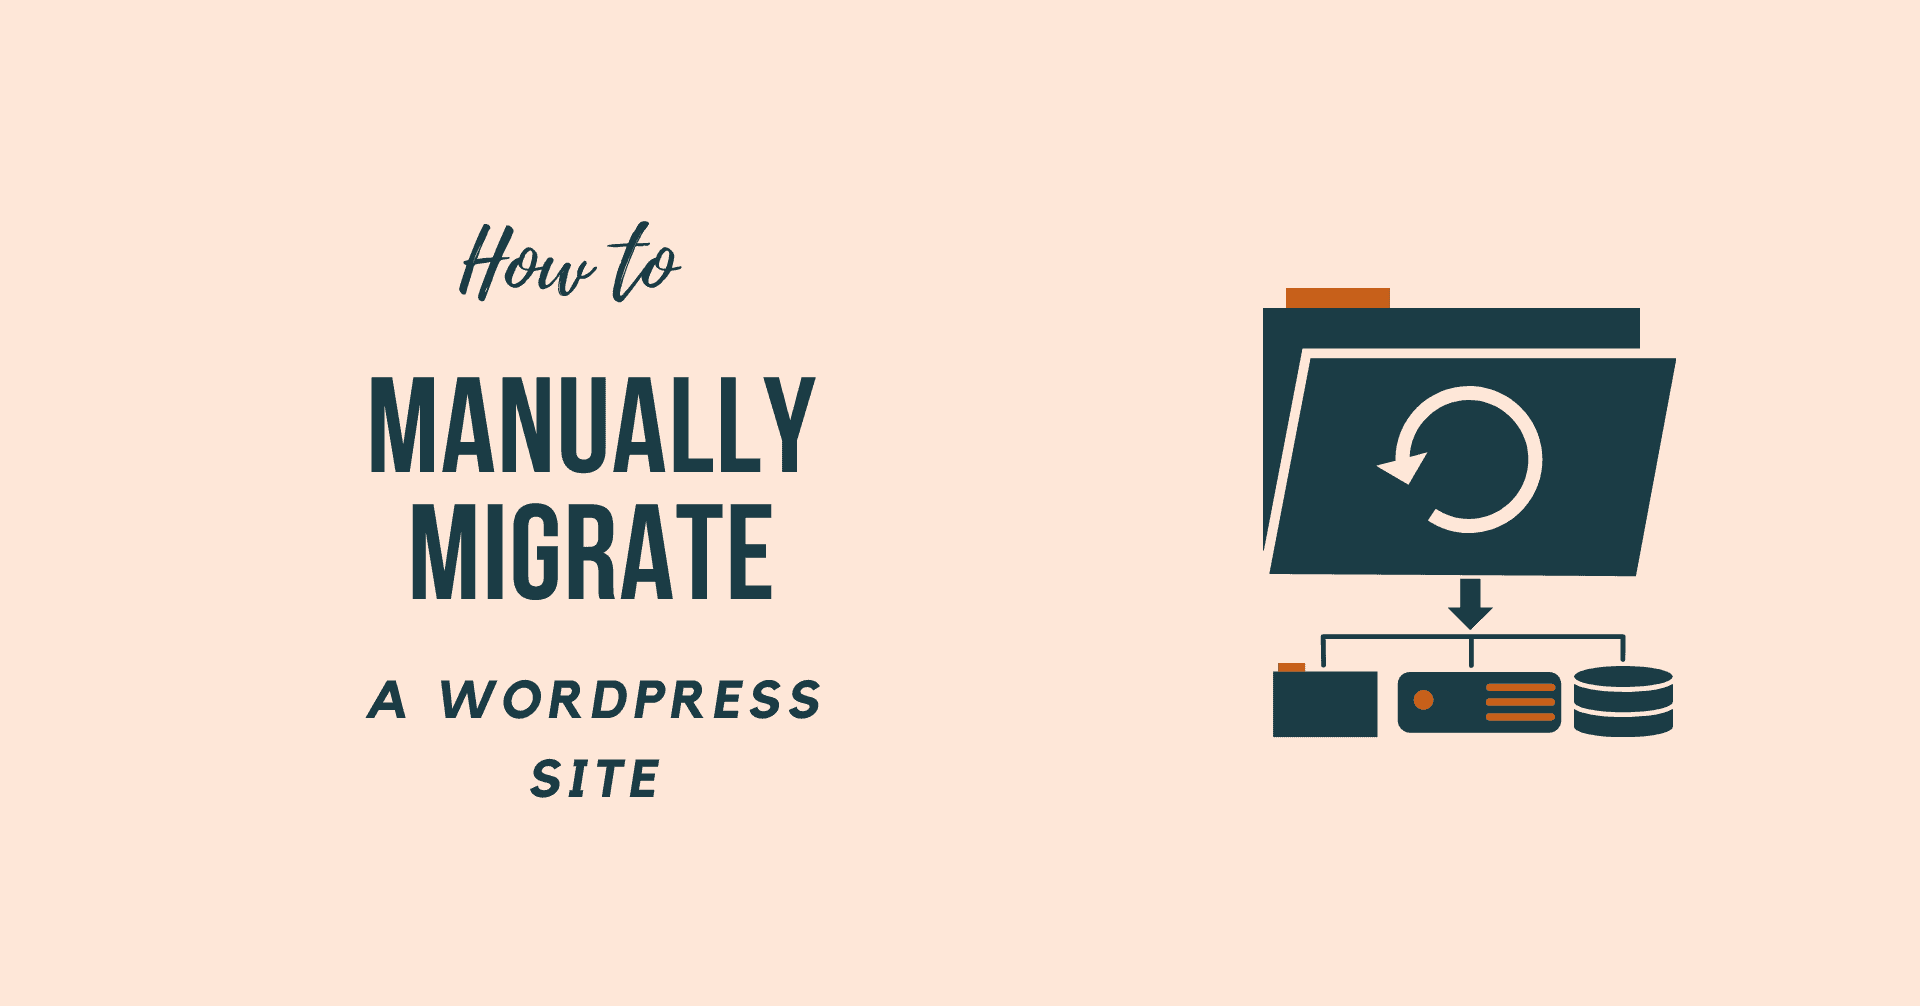 How to Manually Migrate a WordPress Site